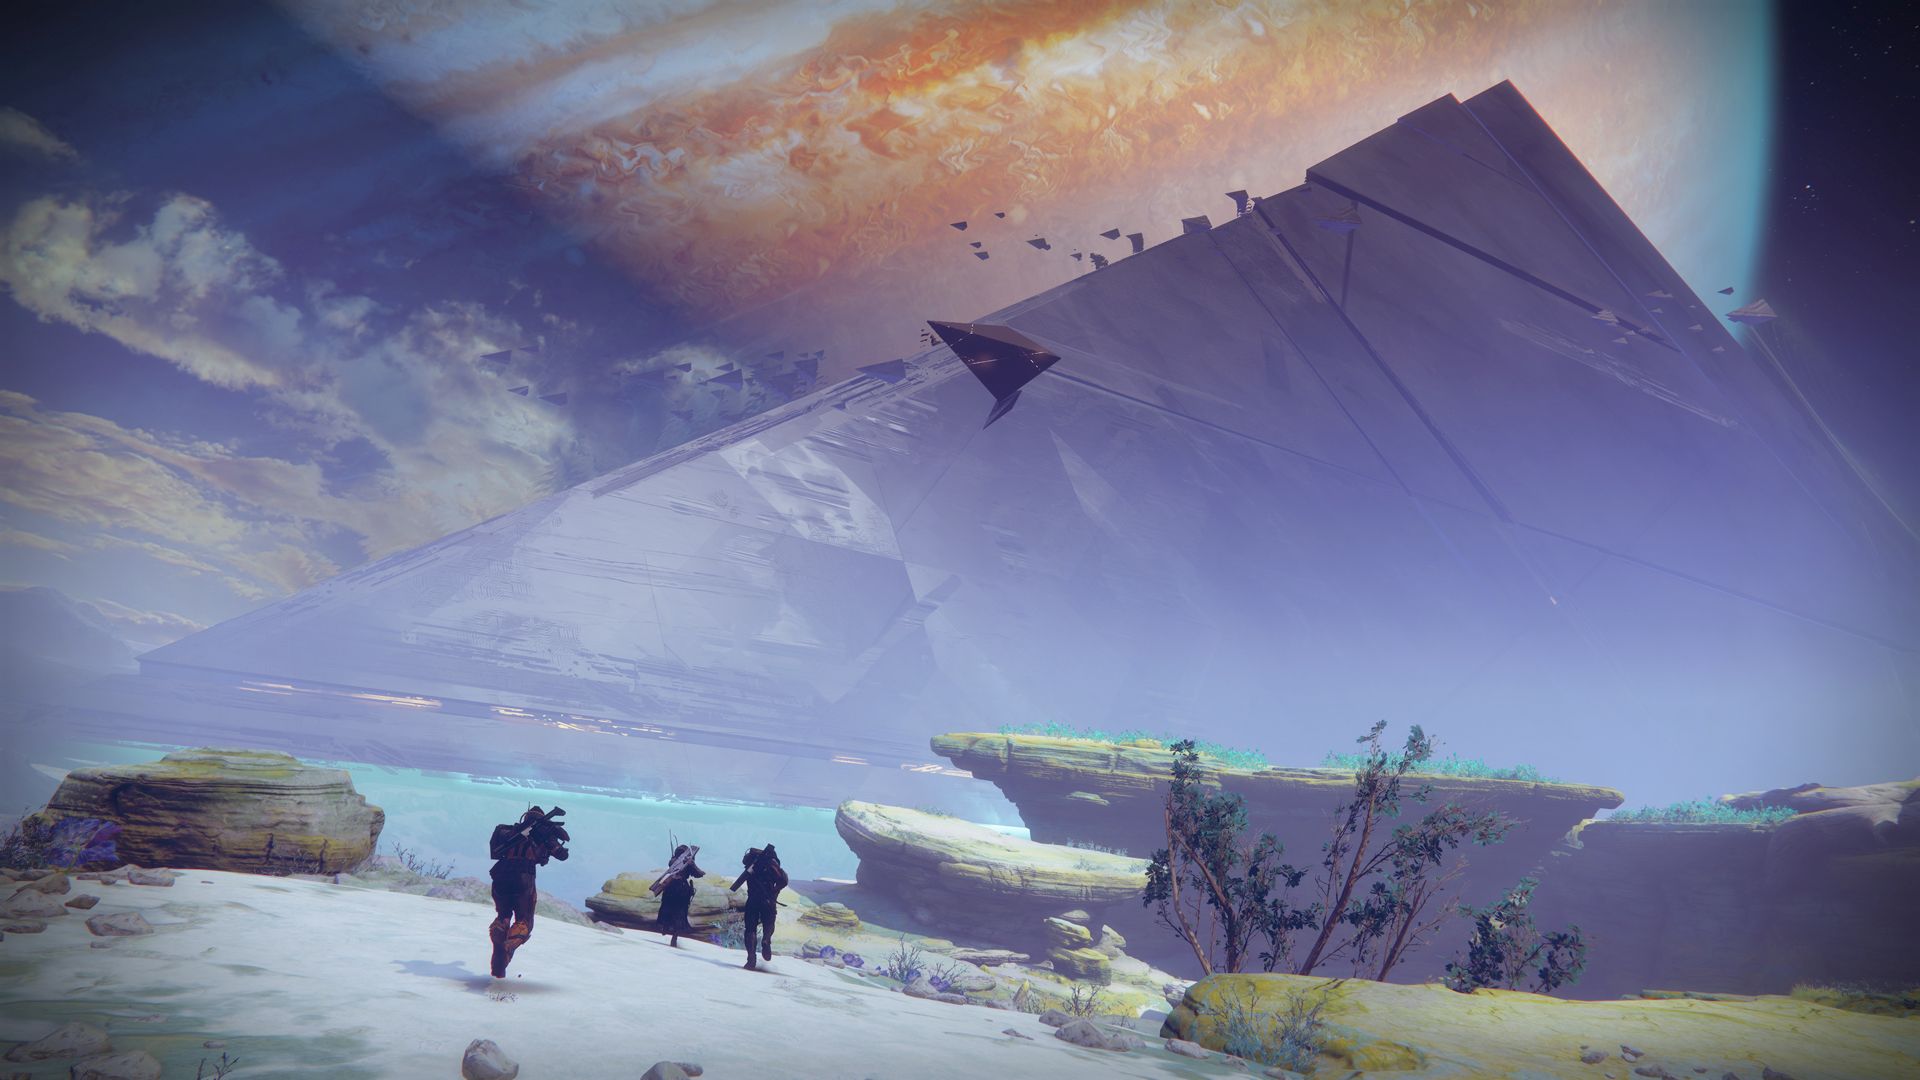 destiny-2-the-witch-queen-lightfall-expansions-confirmed-for-2021-2022